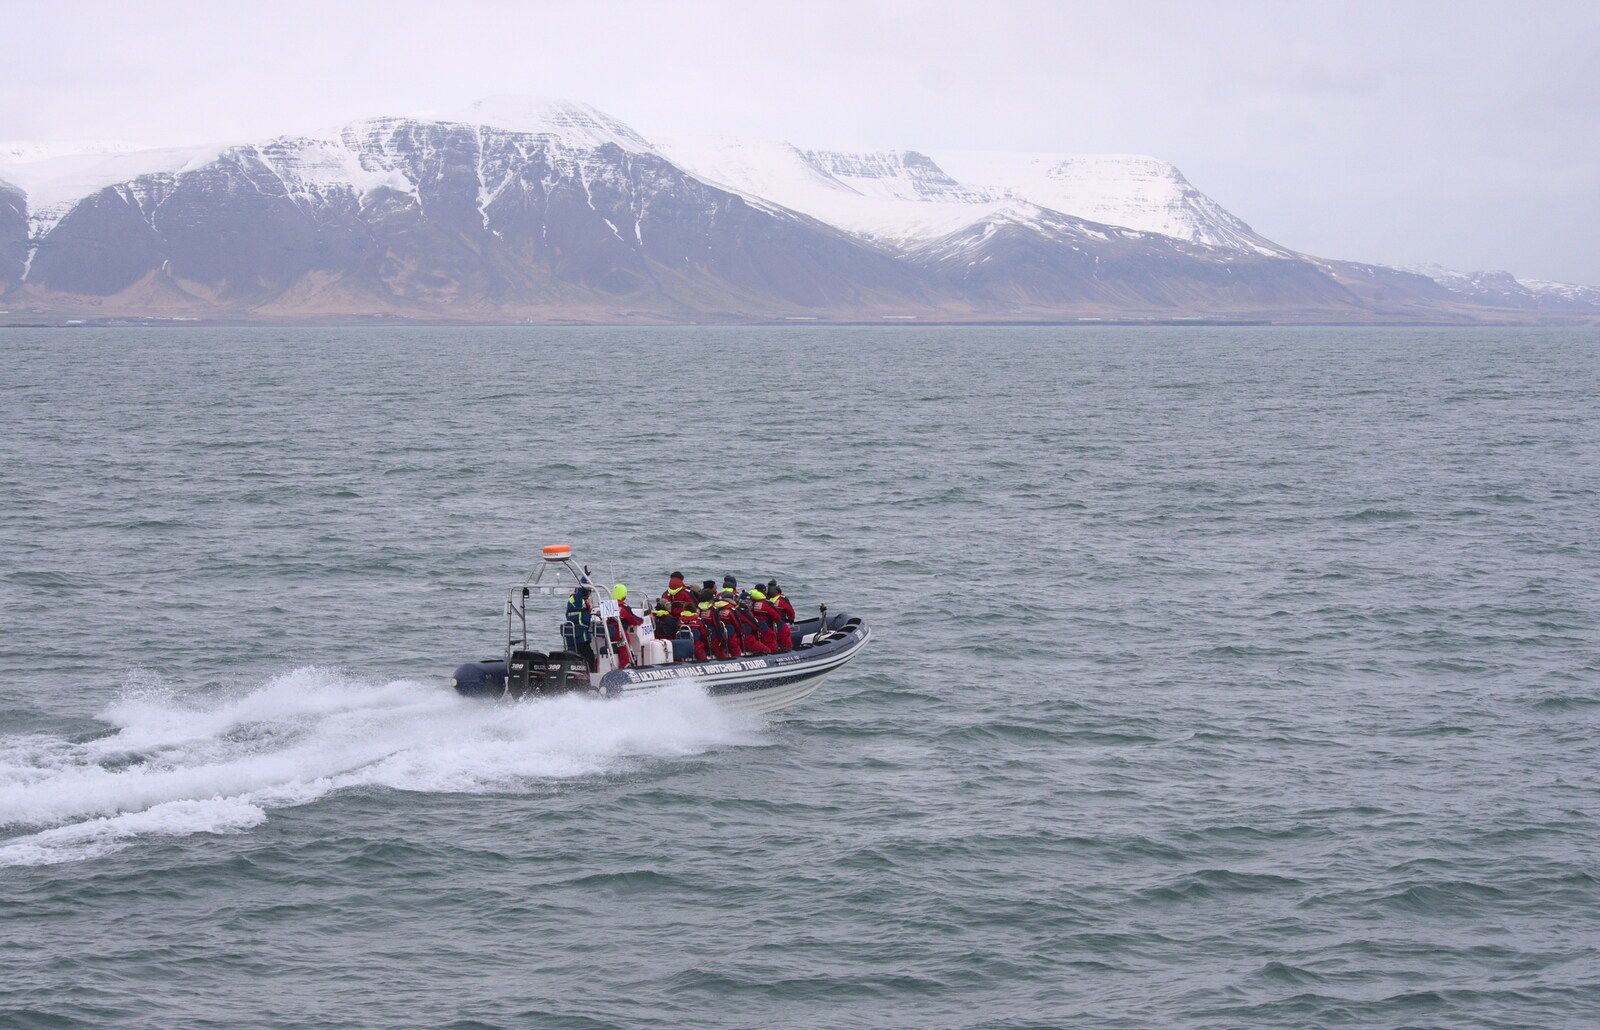 The RIB heads off from Hallgrímskirkja Cathedral and Whale Watching, Reykjavik - 21st April 2017